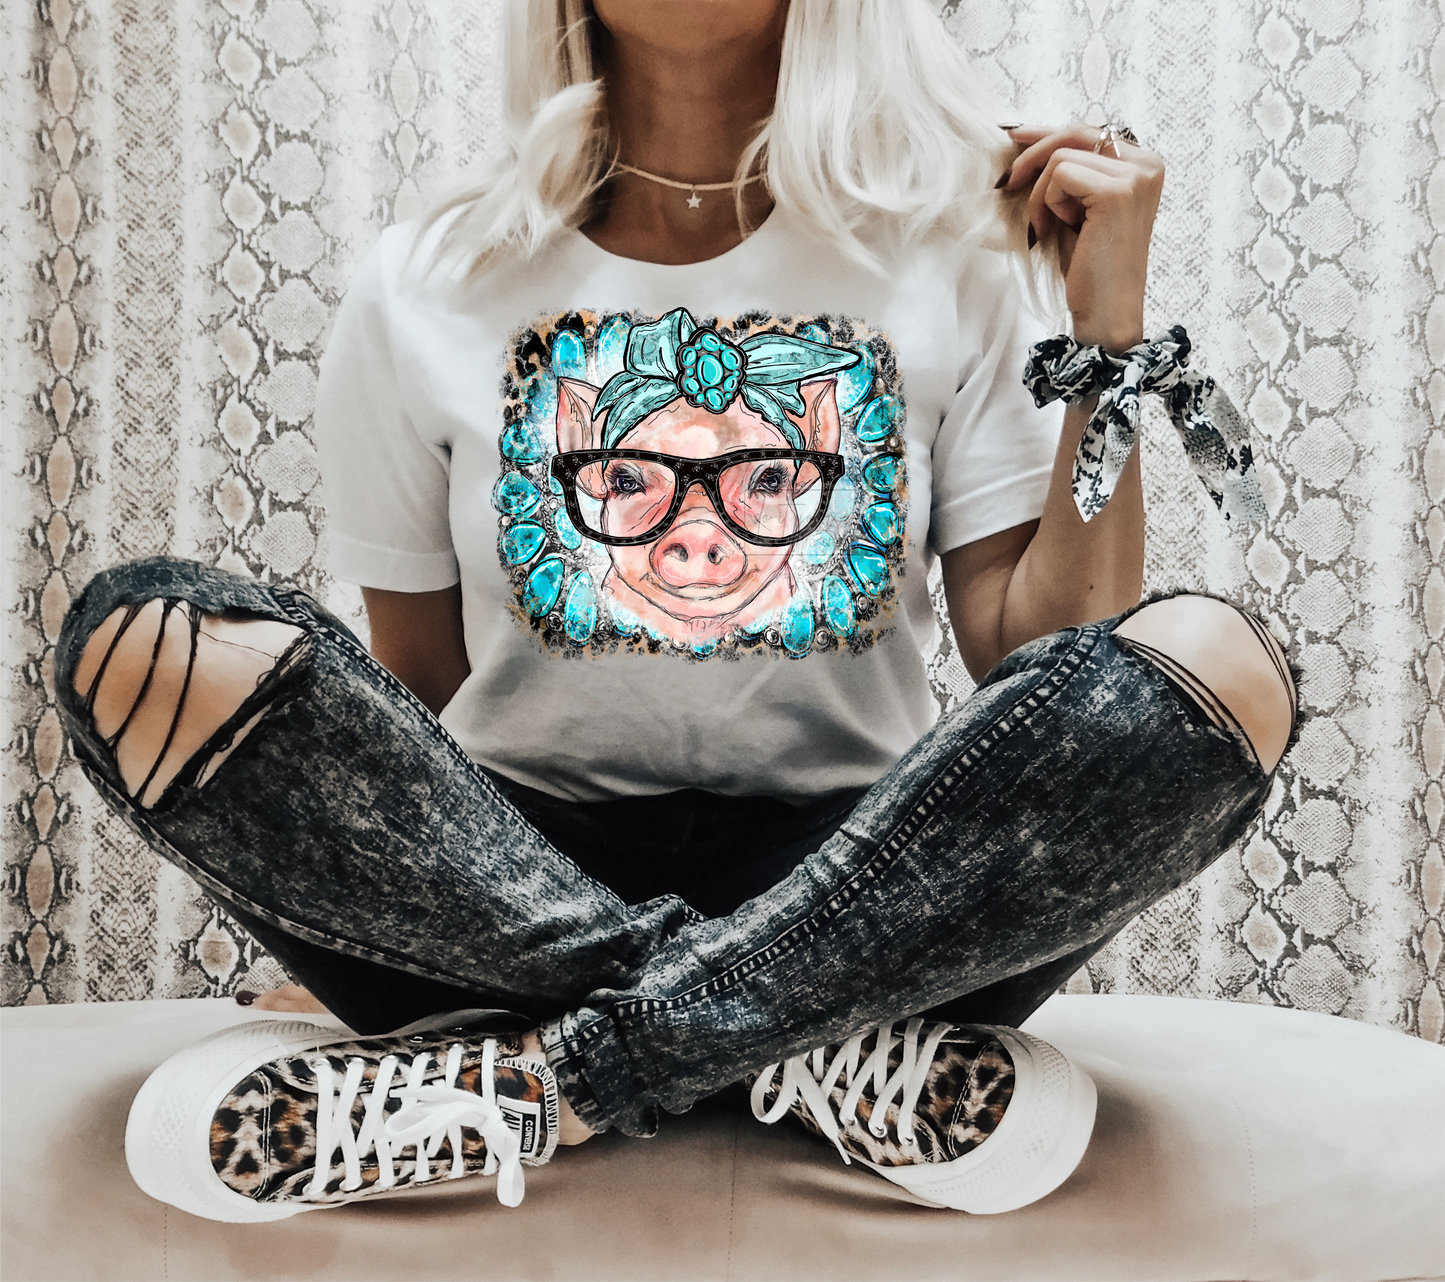 Pig with Glasses Turquoise stone Bandana  ADULT  DTF TRANSFERPRINT TO ORDER